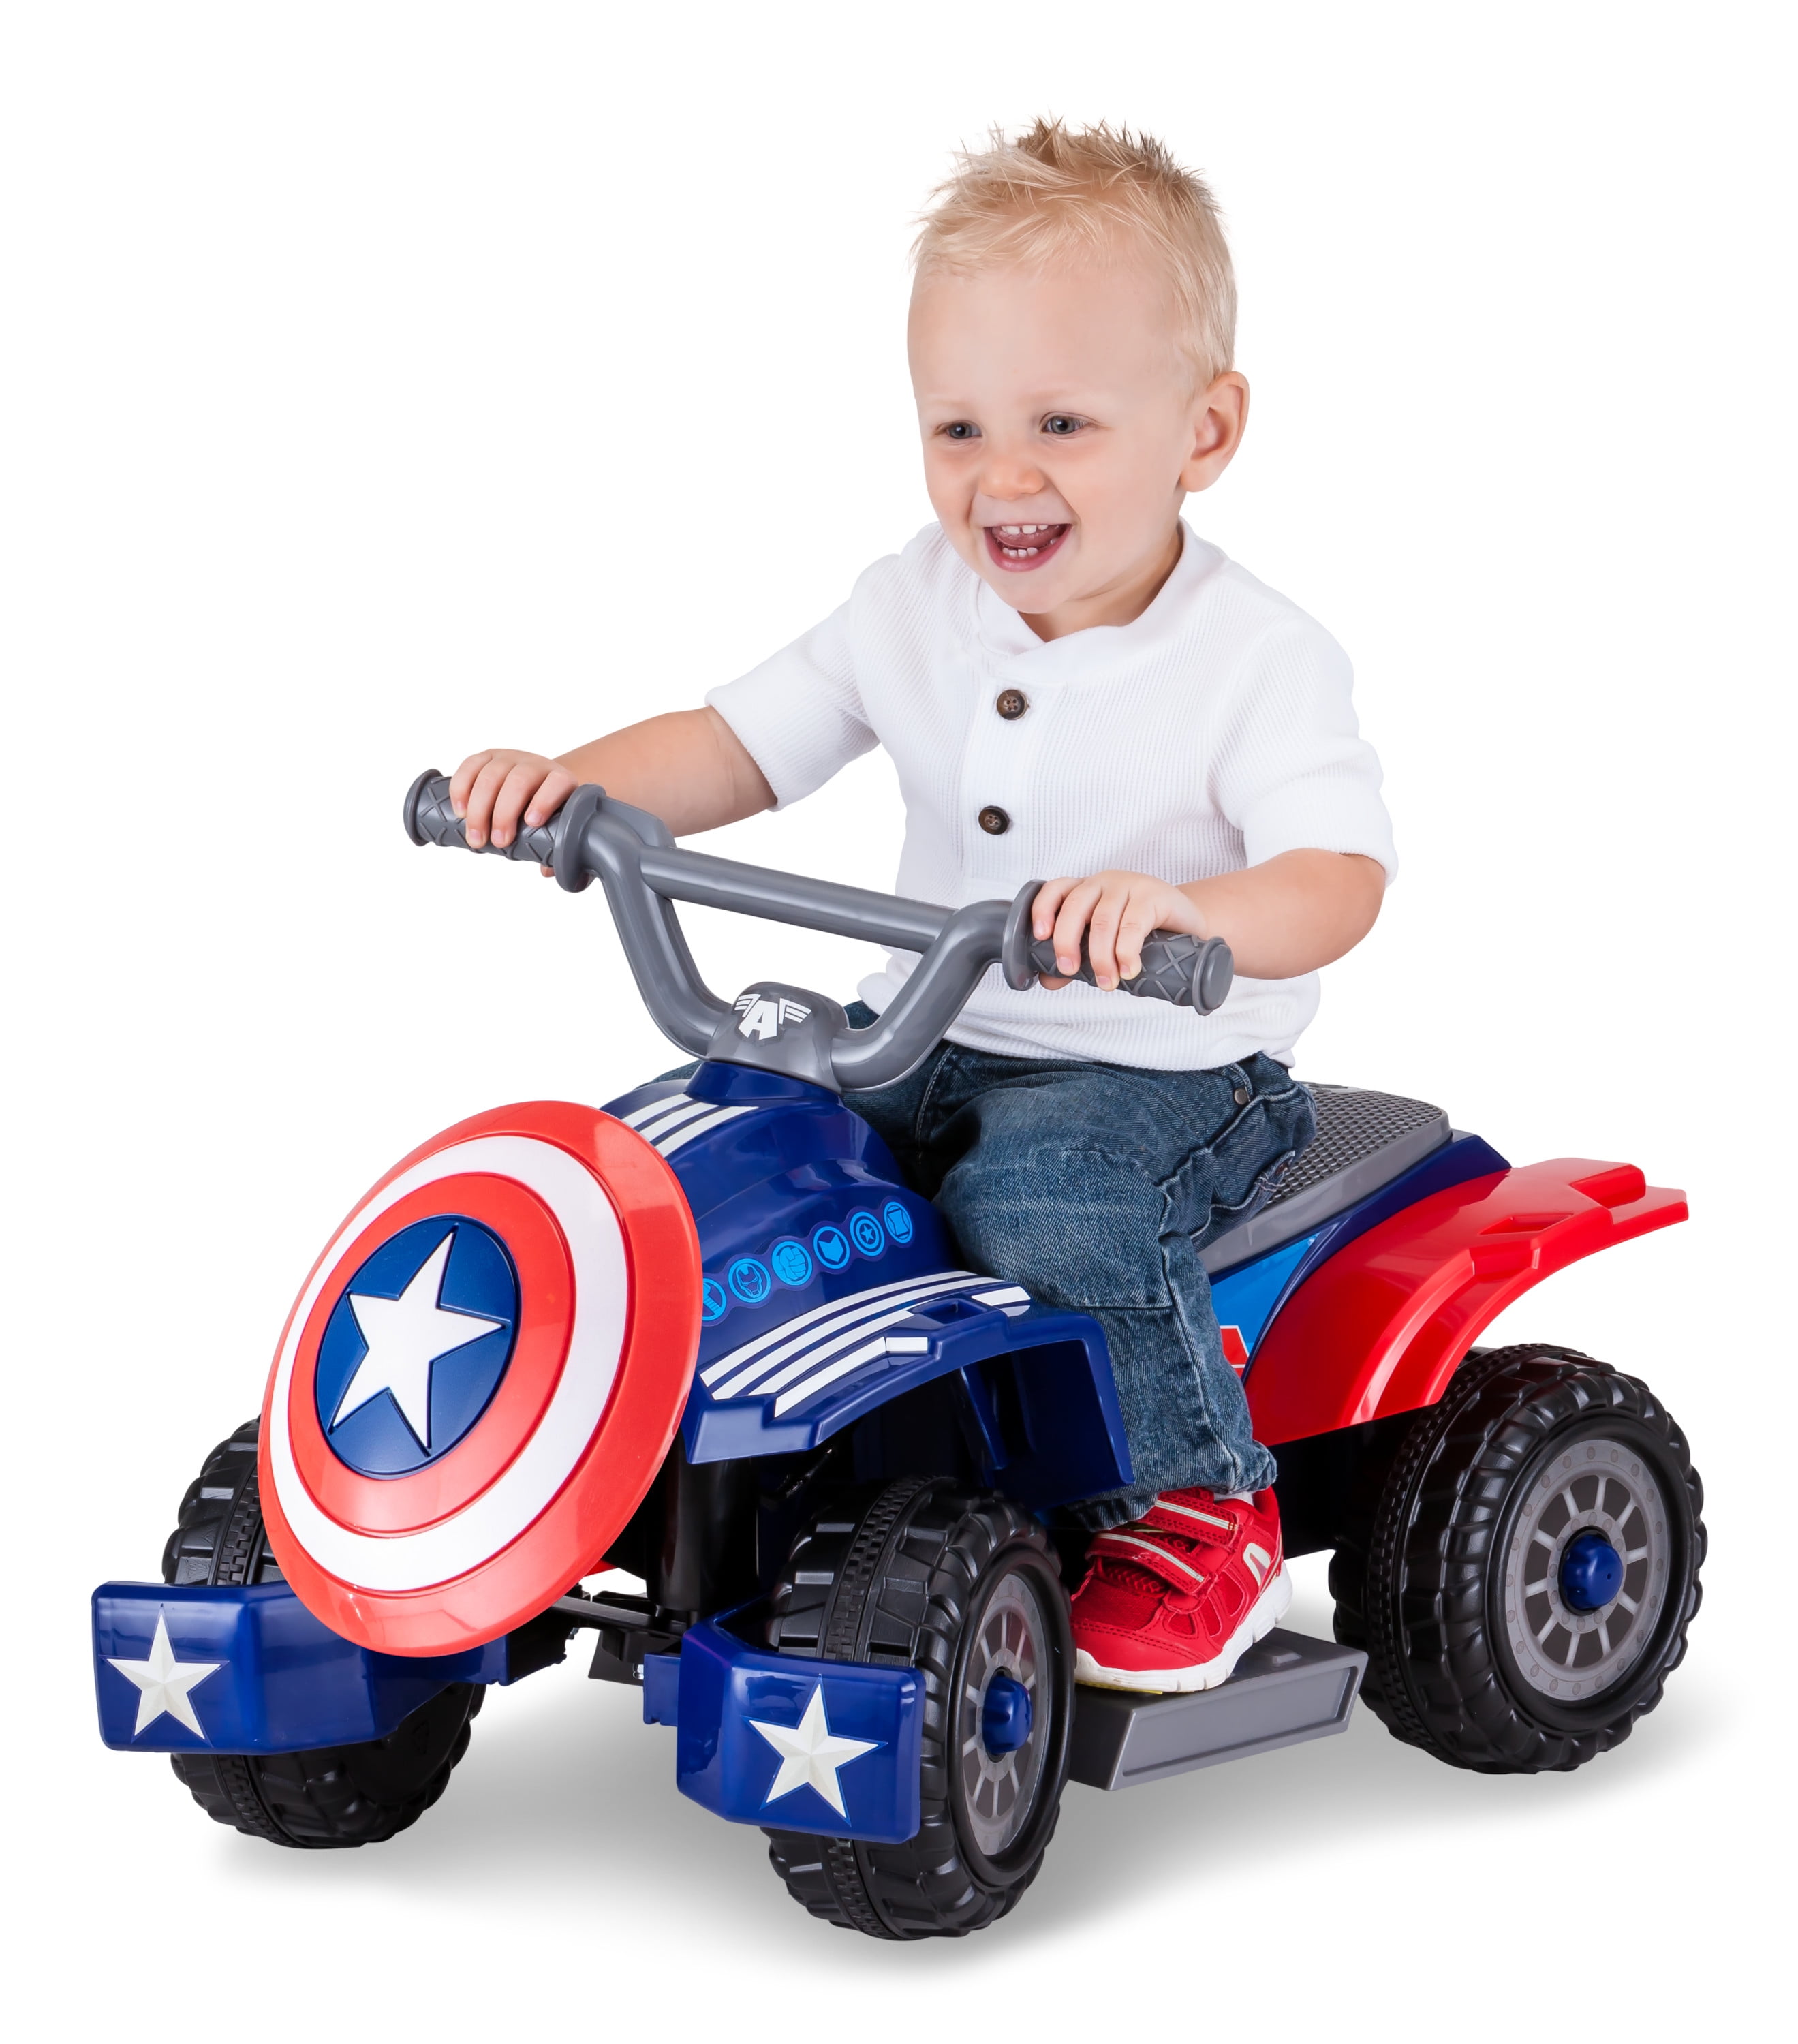 Find Your Perfect Marvel Captain America Toddler Ride-On Toy by